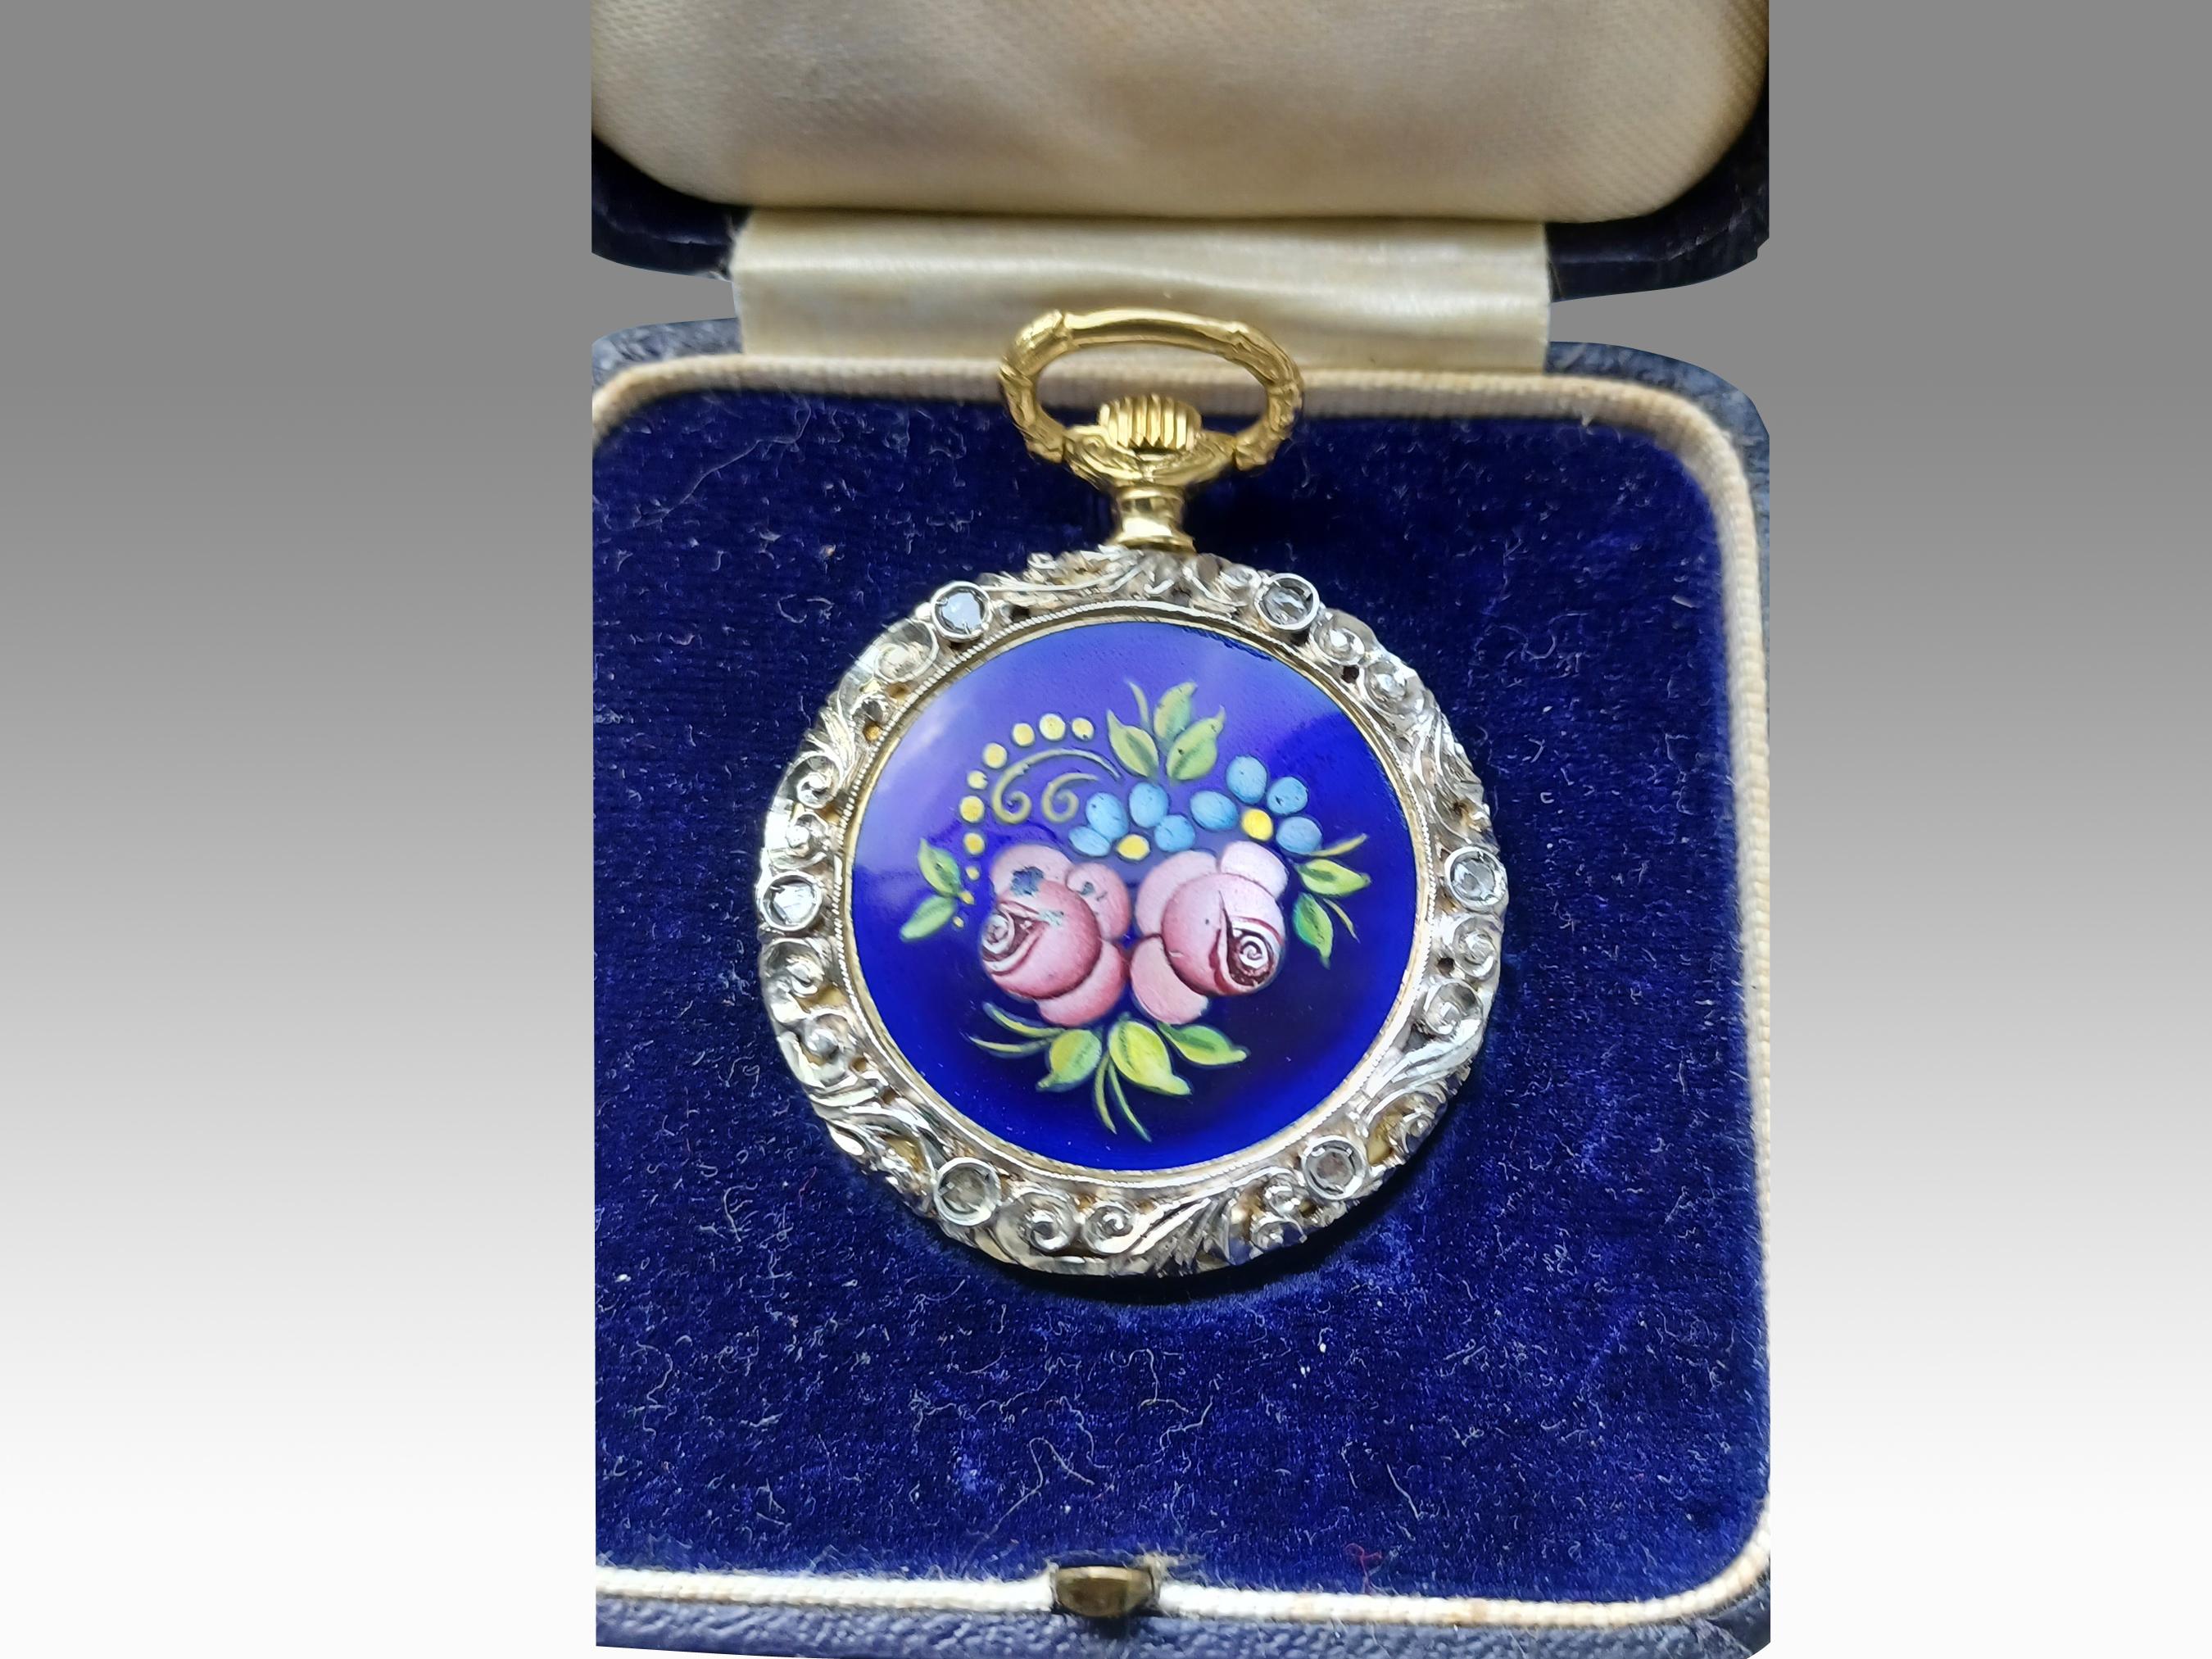 Rare 18ct Ruby and Diamond Pocket Watch with Elaborate Mountings and Jewels For Sale 7